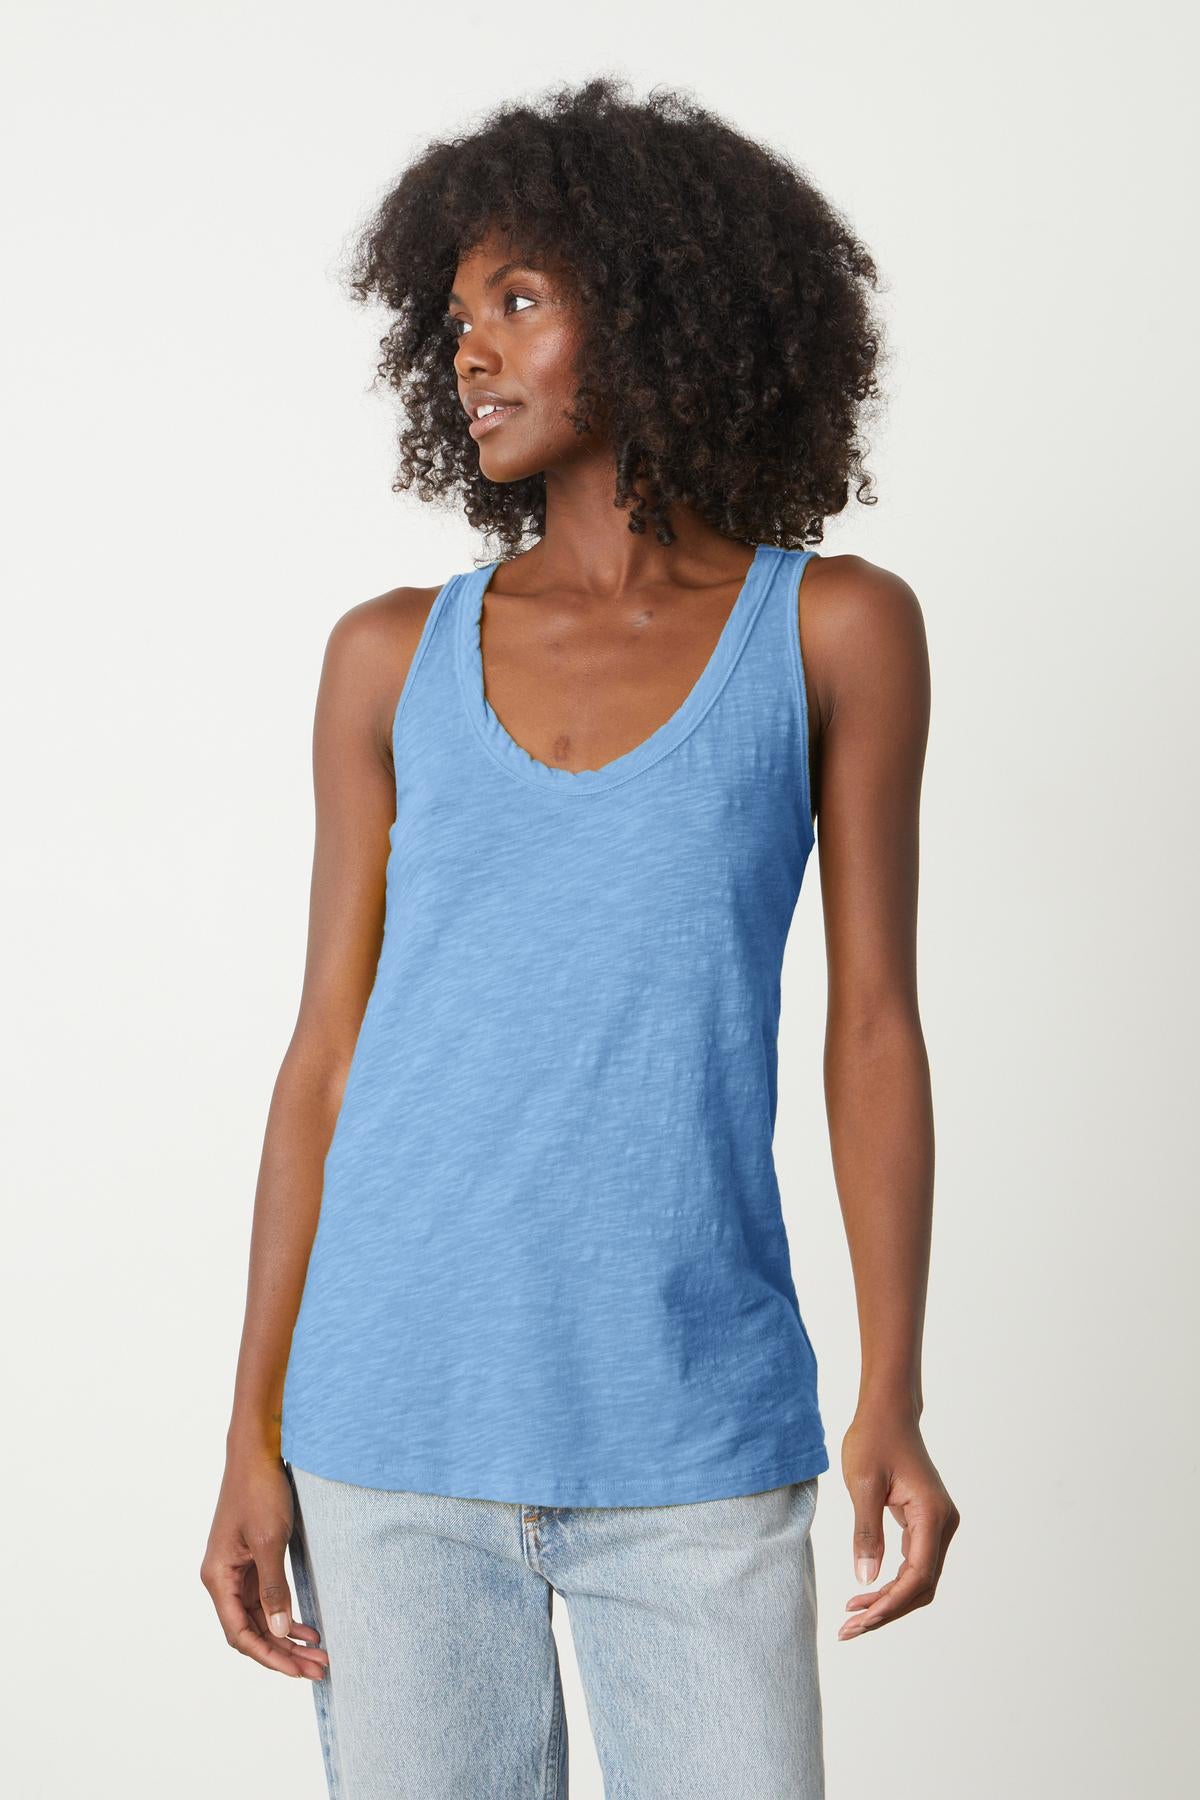   A woman wearing a Velvet by Graham & Spencer JOY ORIGINAL SLUB SCOOP NECK TANK in blue, with a soft cotton fabric and flattering arm hole. 